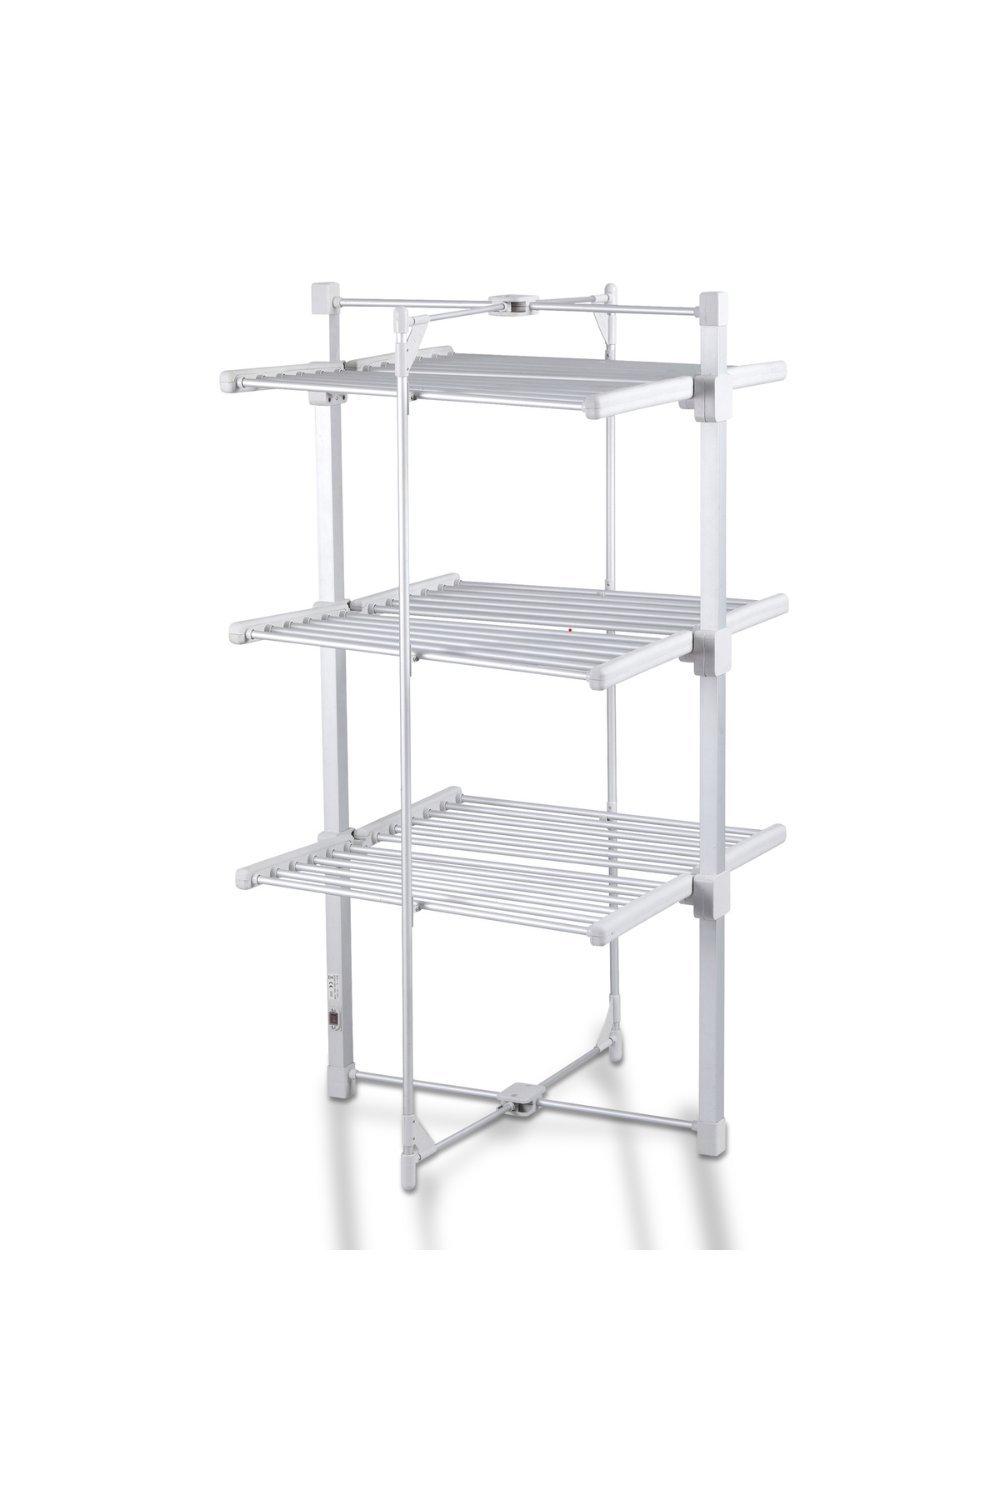 Mini 3 Tier 24 Heating Bars Foldable Airer Indoor Fast Dry Washing Electric Clothes Dryer Rack with 